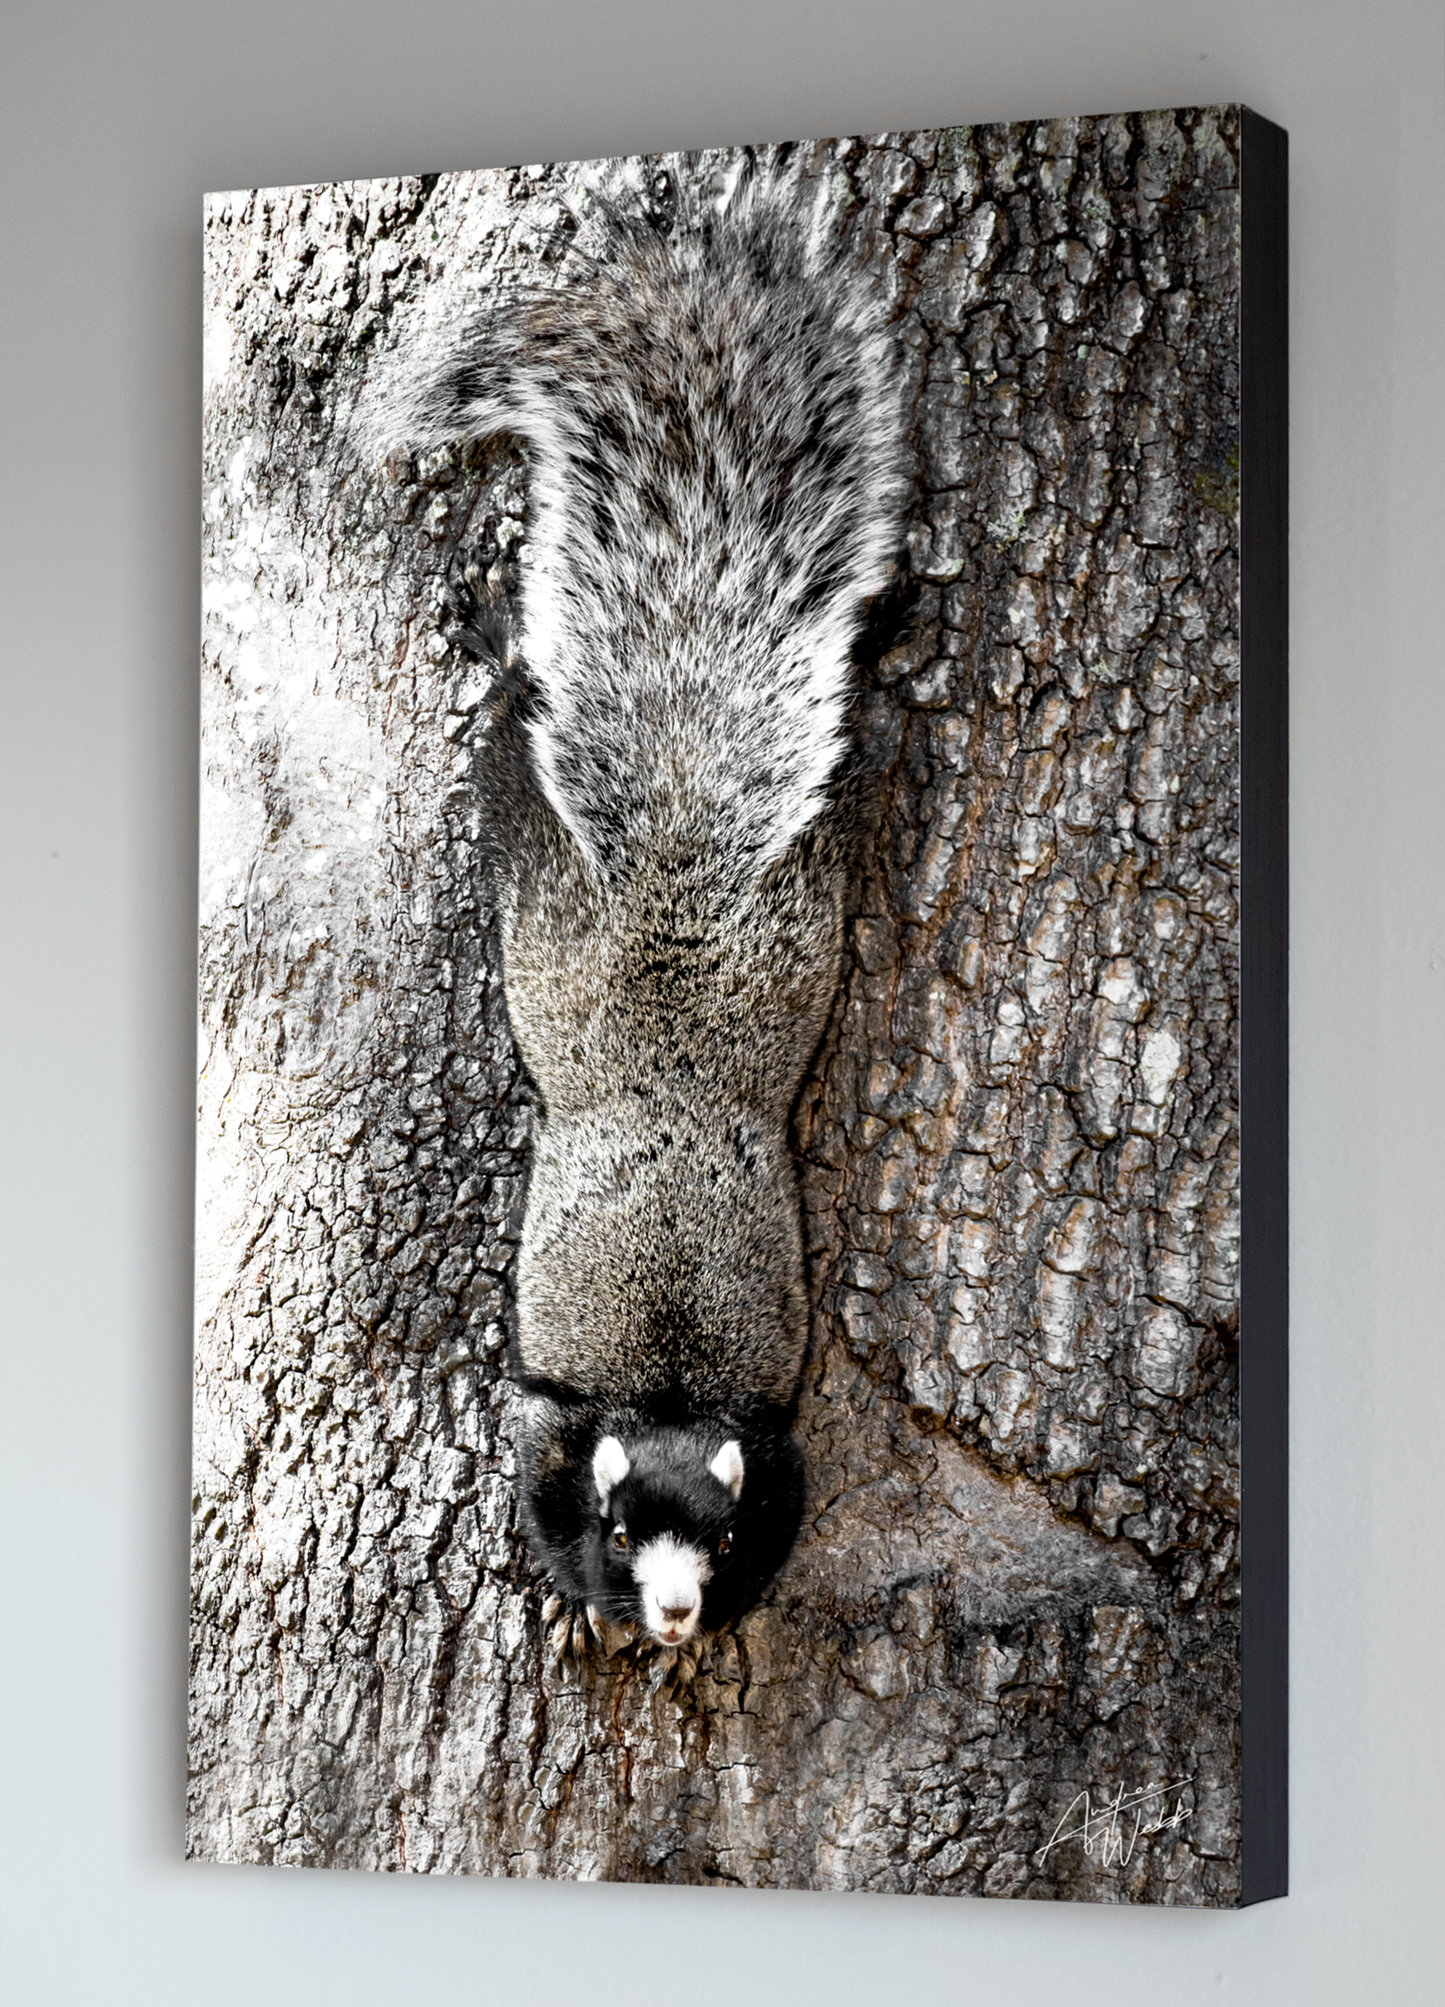 A Fox Squirrel Perched on a Tree in a Black Background Fine Art Portrait in Livingroom Setting. Fox Squirrel Photography. Fox Squirrel art. Fox Squirrel Print. Fox Squirrel canvas. Fox Squirrel wall art. Fox Squirrel gifts. Animal Photography.